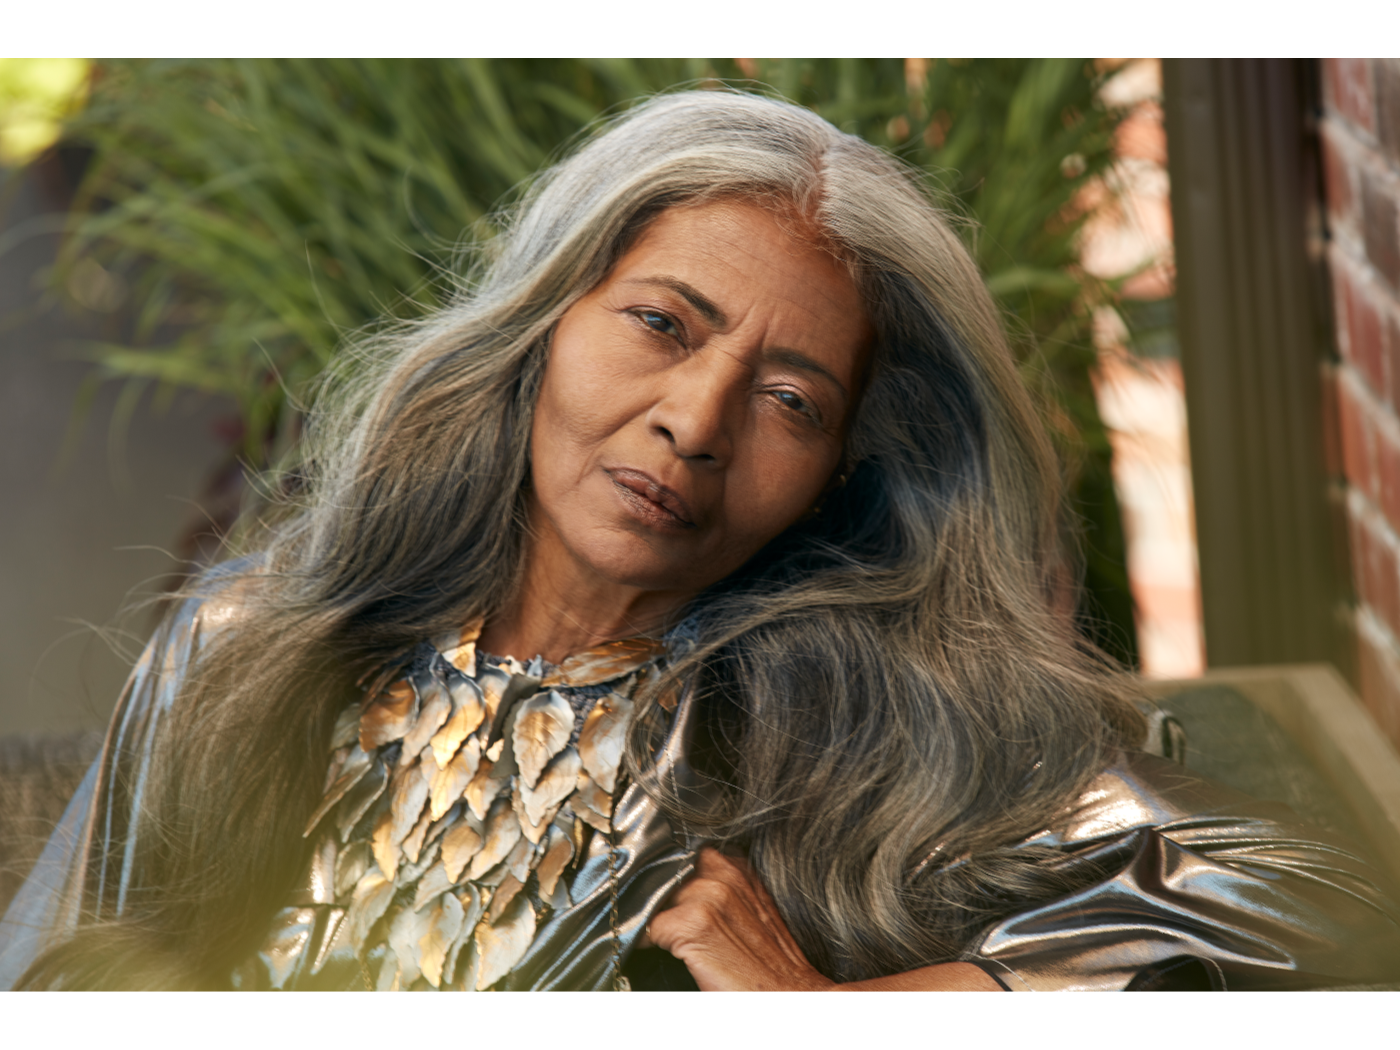 68-Year-Old Model JoAni Johnson Says Negative Comments On Social